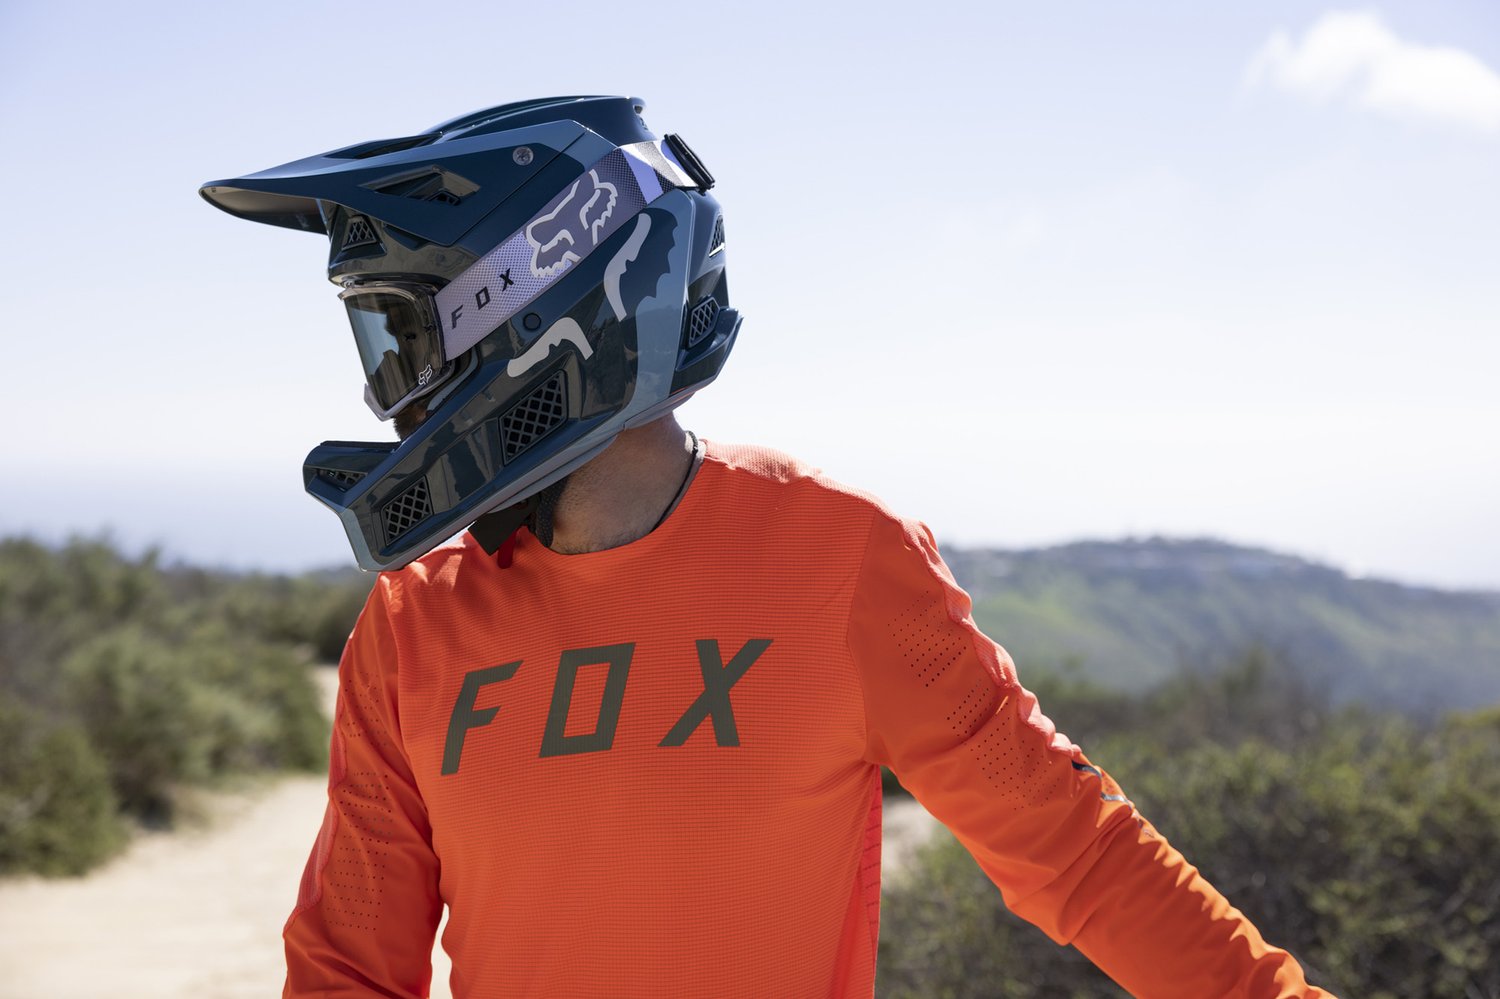 Fox Mountain Bike & Lifestyle Clothing for Sale in UK, LIOS